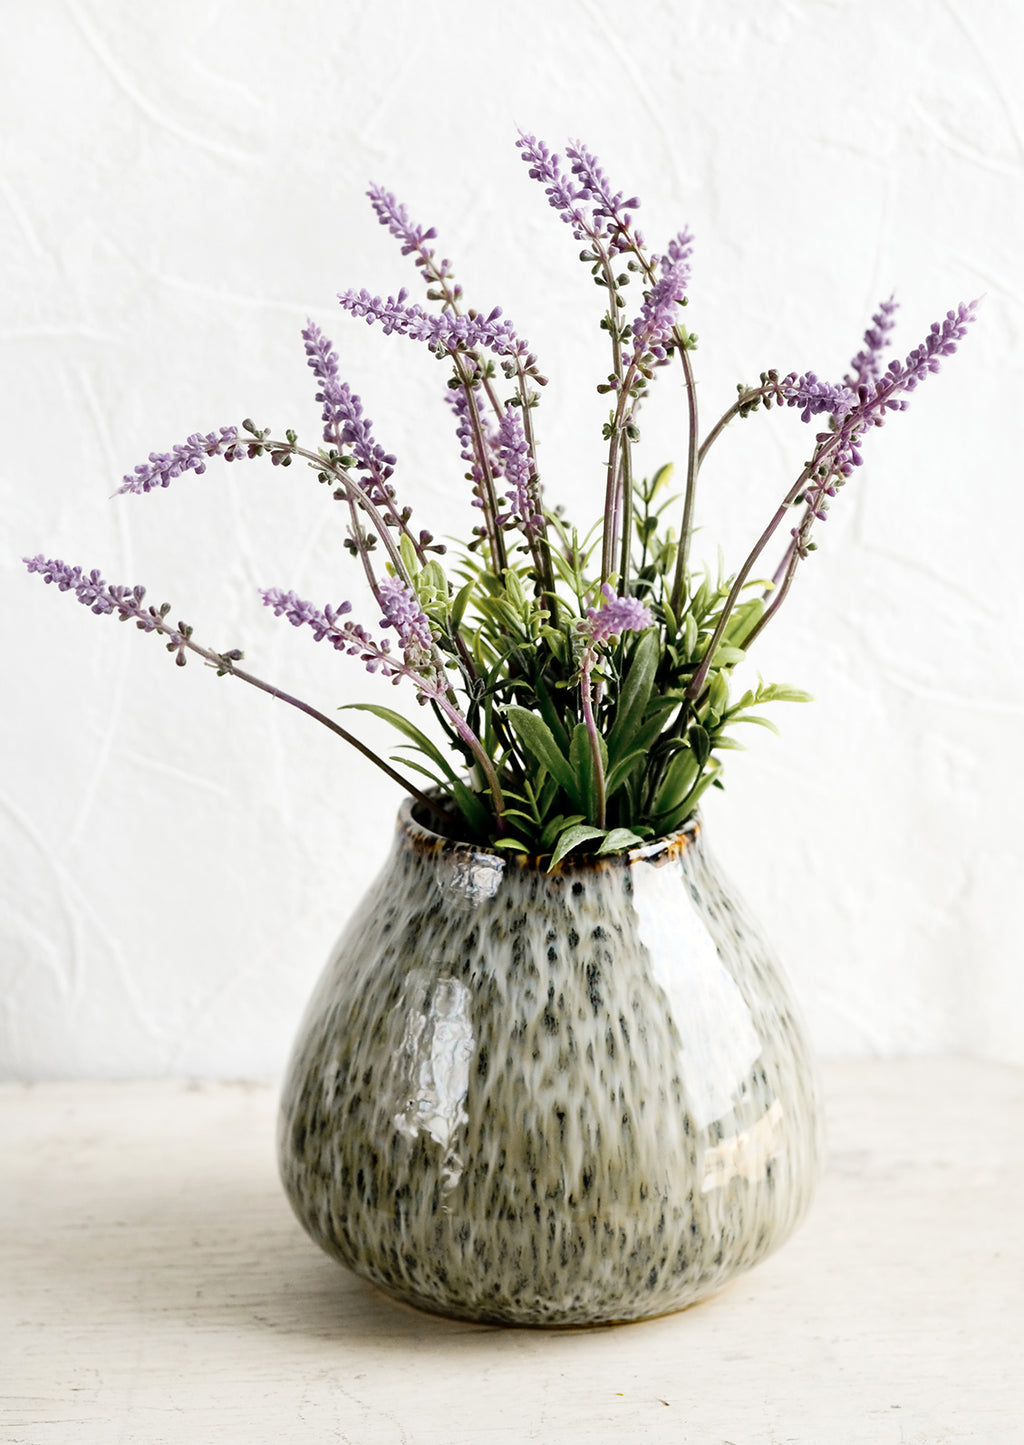 2: A round vase in glossy, speckled green glaze with lavender flowers.